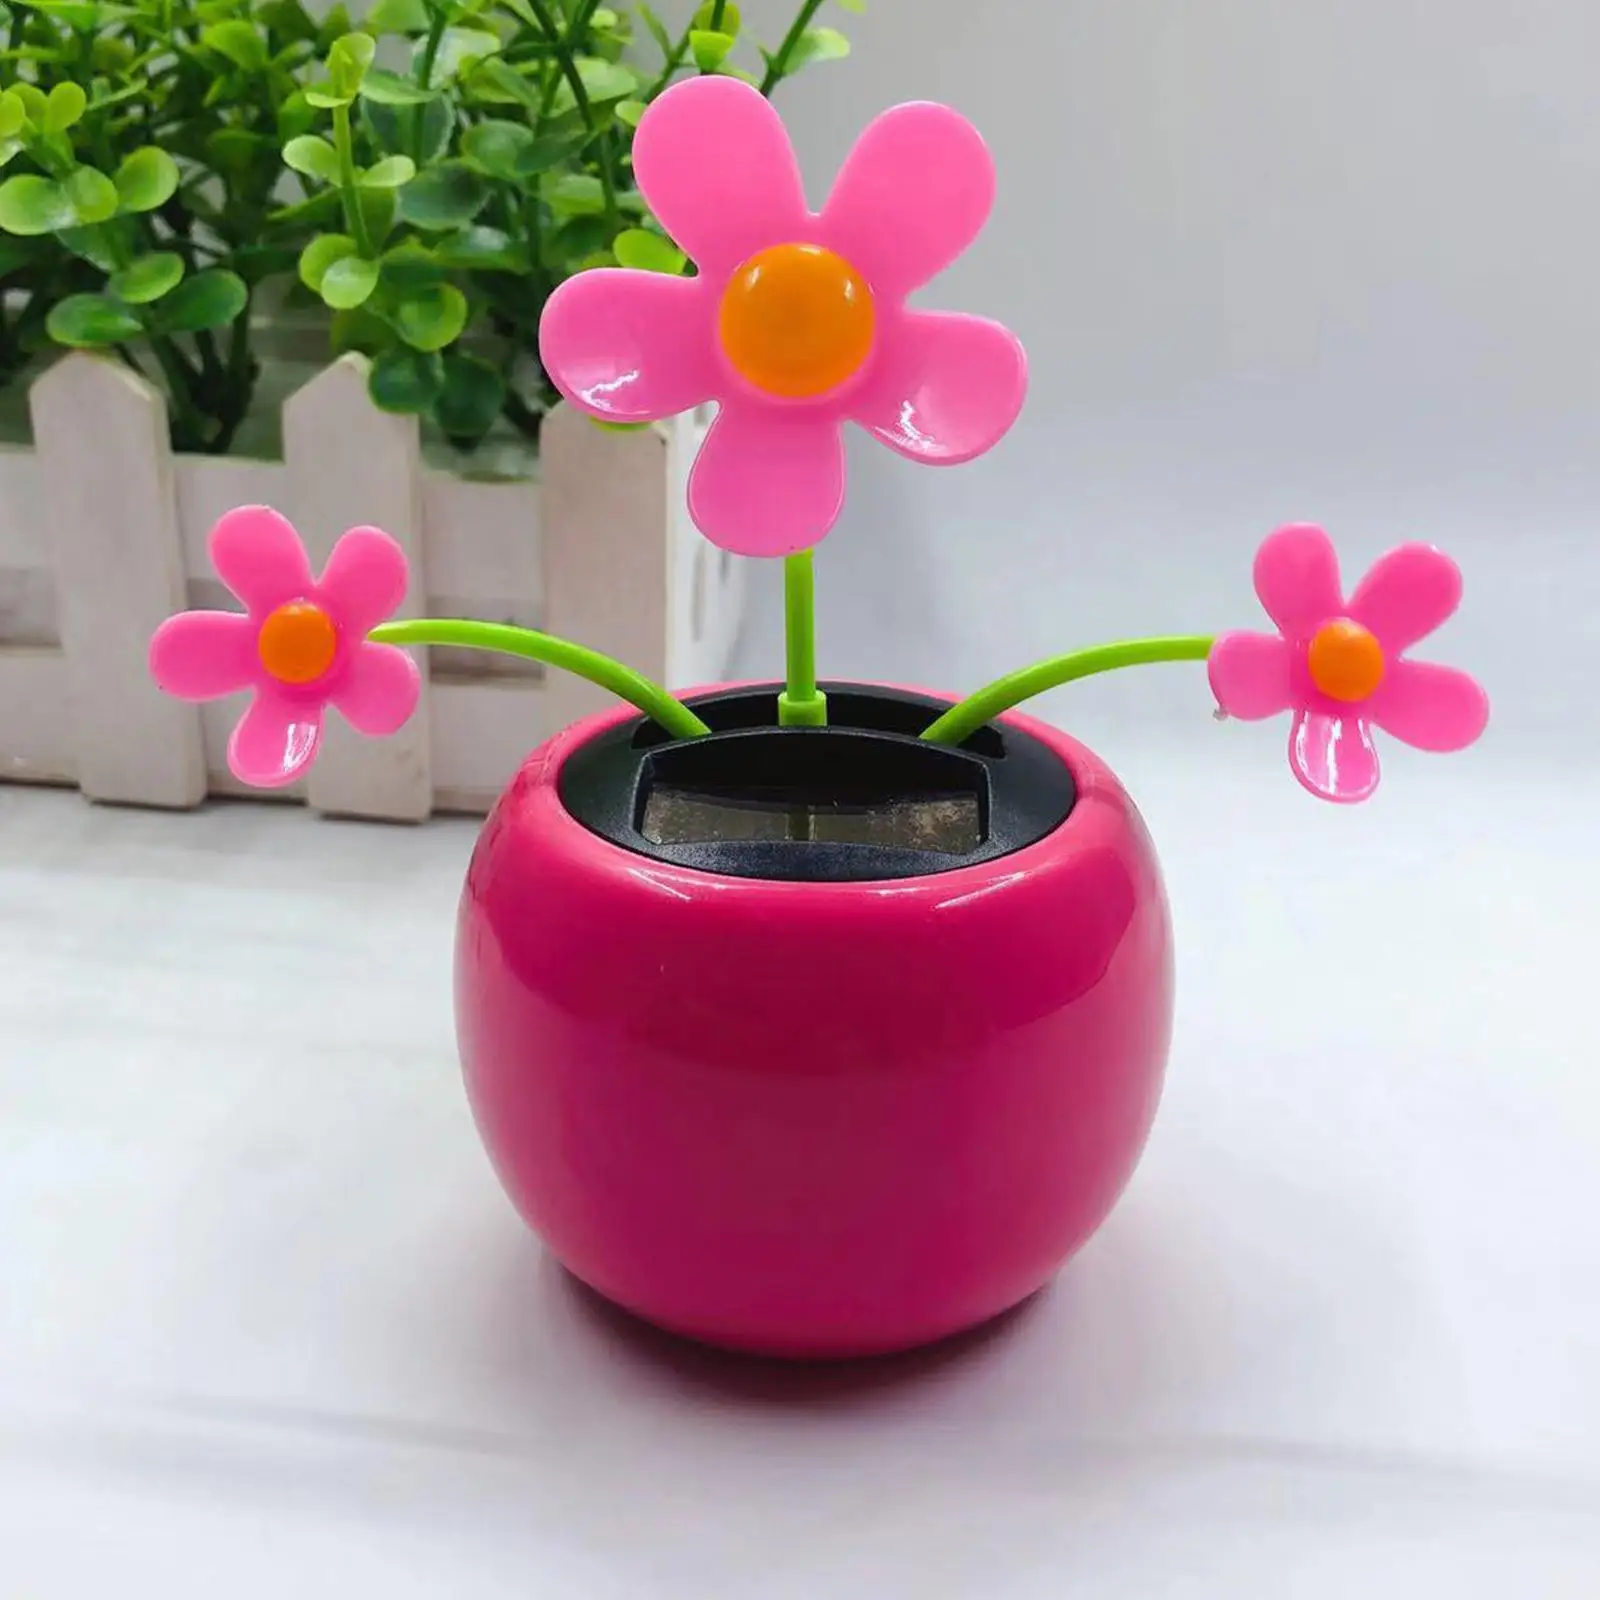 Adorable Solar Power Dancing in Colorful Pots Bobble Head Flowers Solar Dancing Toy for Car Office Dashboard Birthday Gift Decor